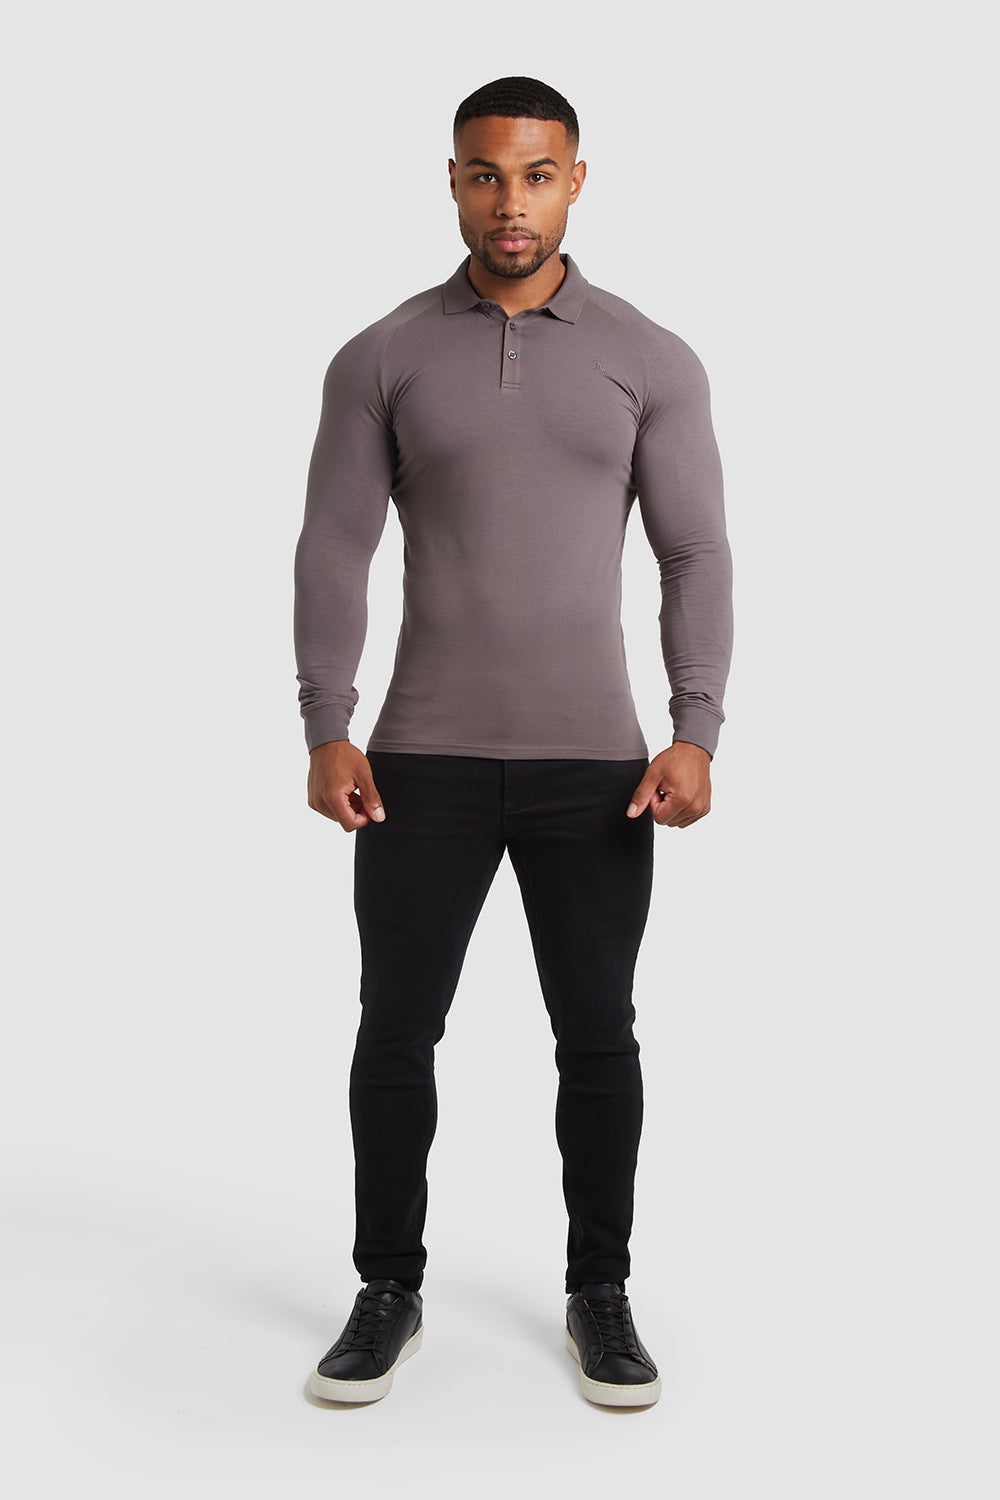 Muscle Fit Polo (LS) in Mole - TAILORED ATHLETE - ROW